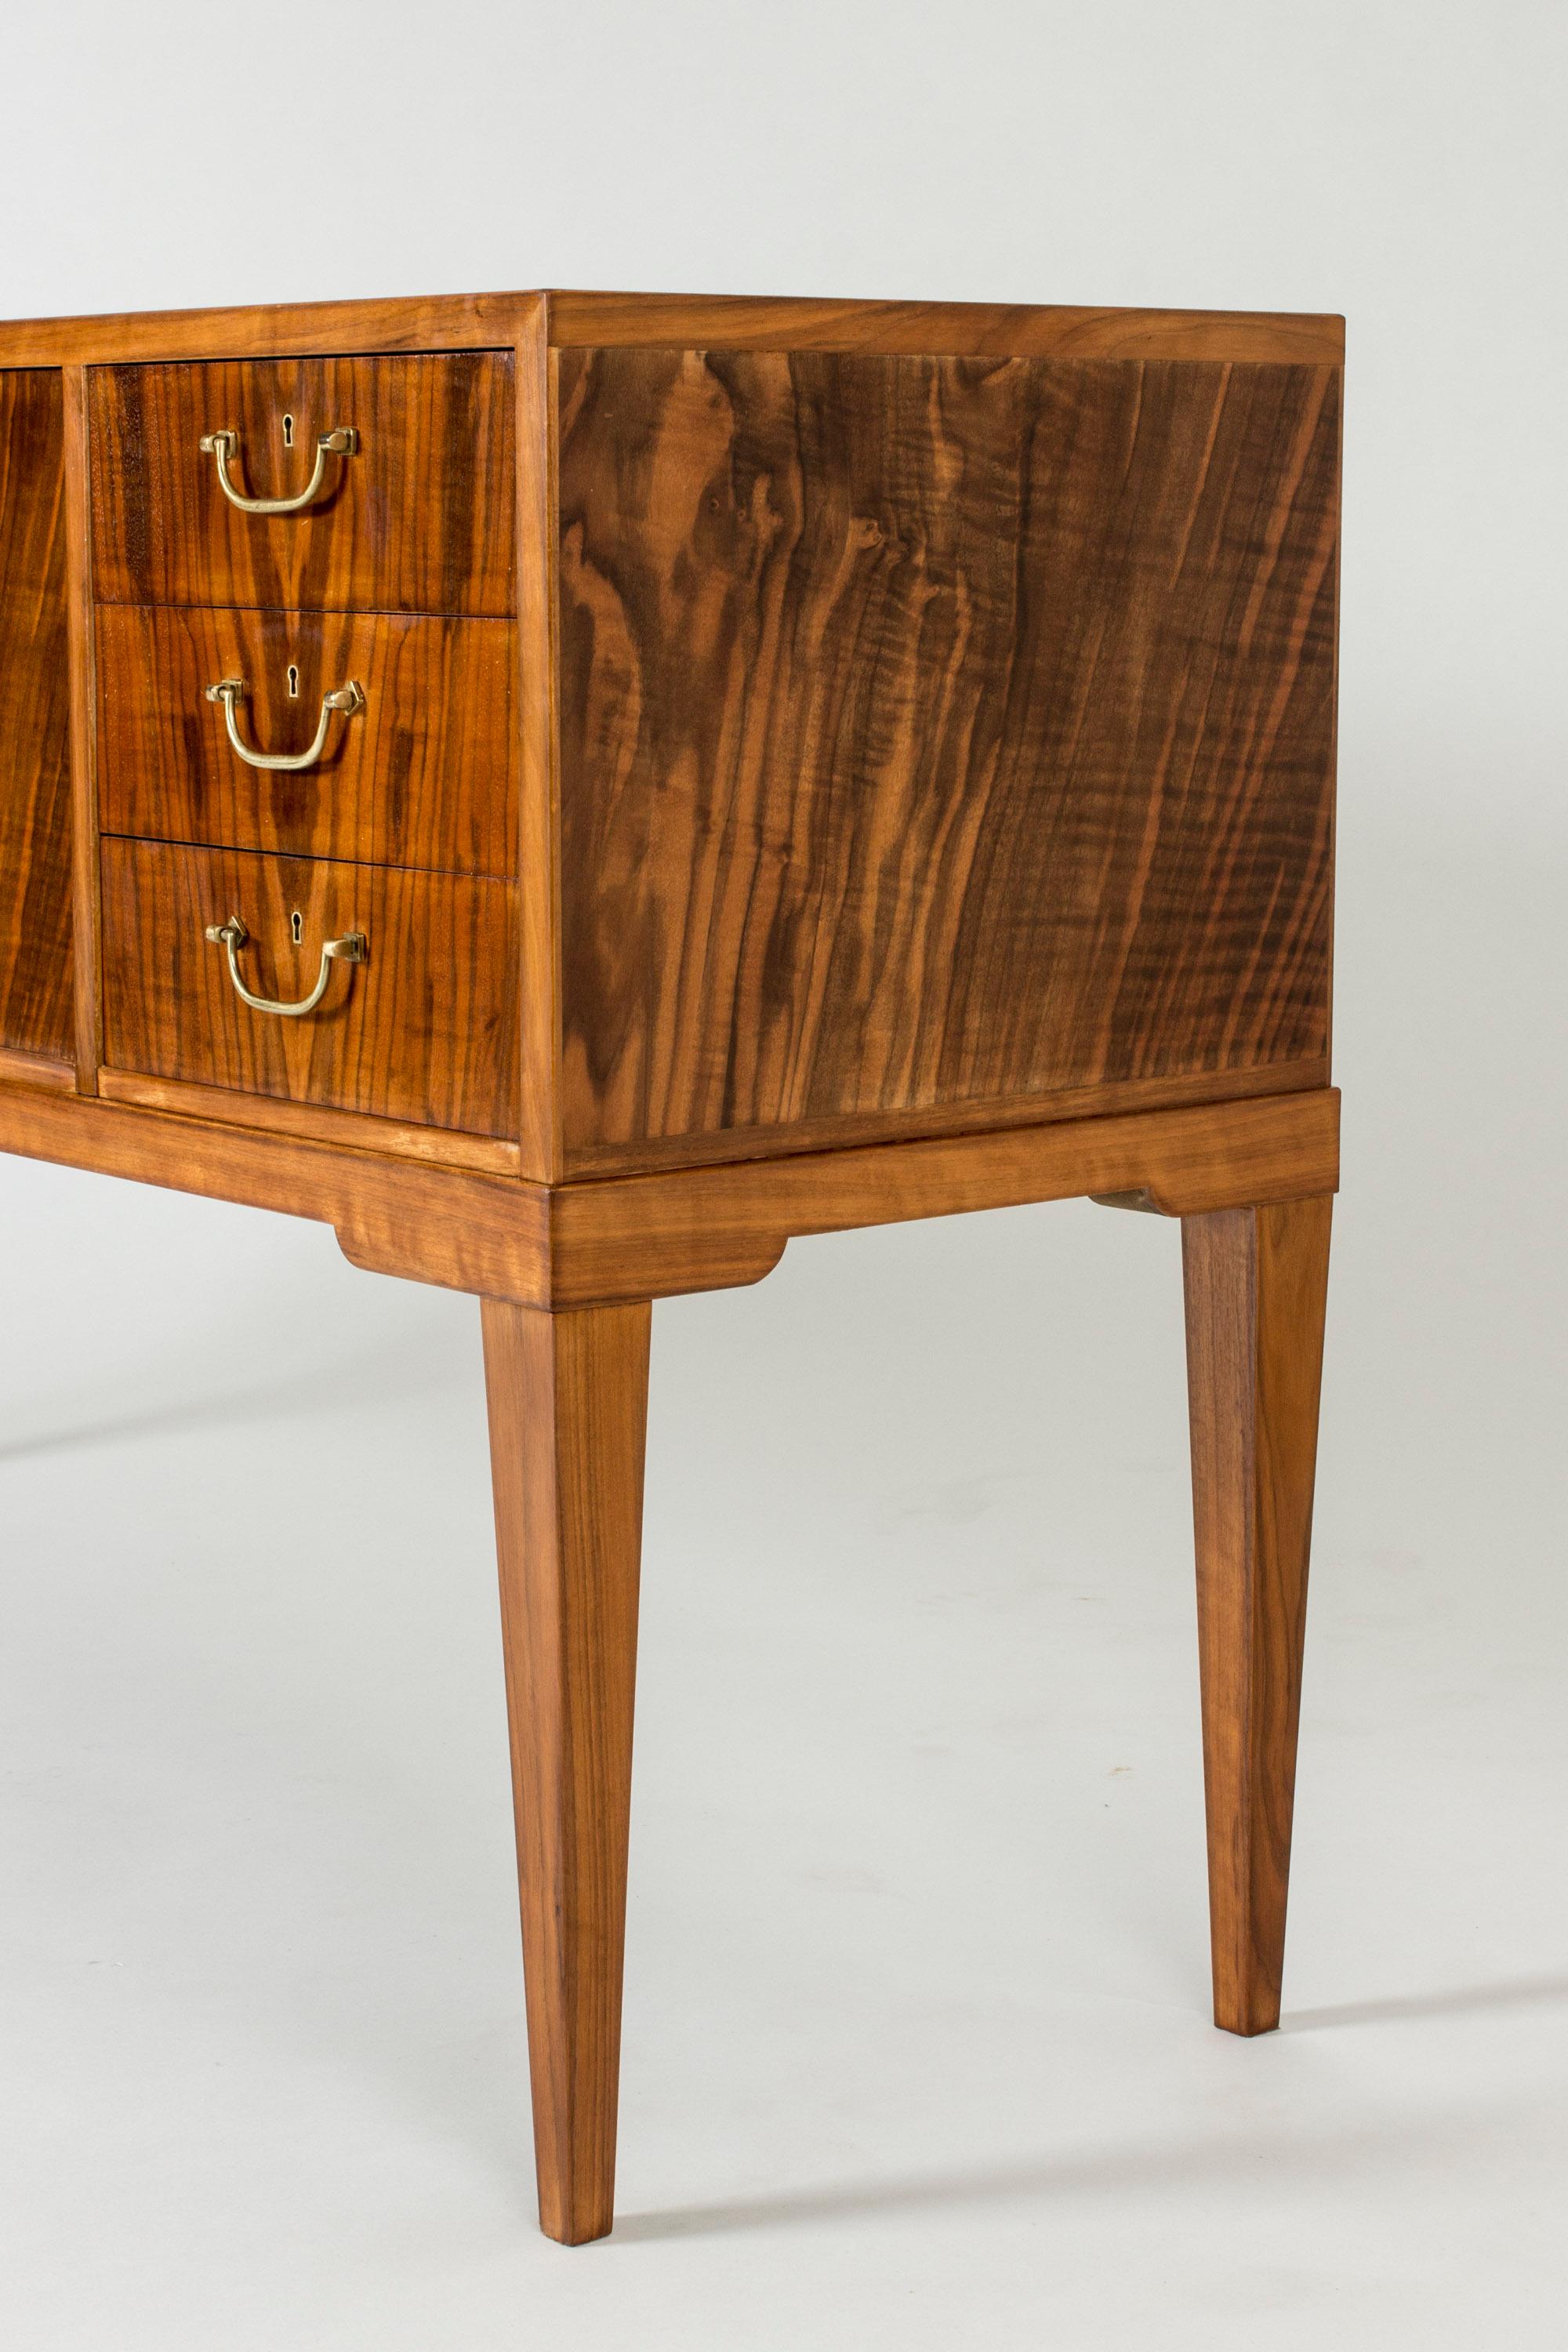 Swedish Grace Mahogany Inlaid Sideboard/Credenza by Mobilia, Sweden, 1940s 1